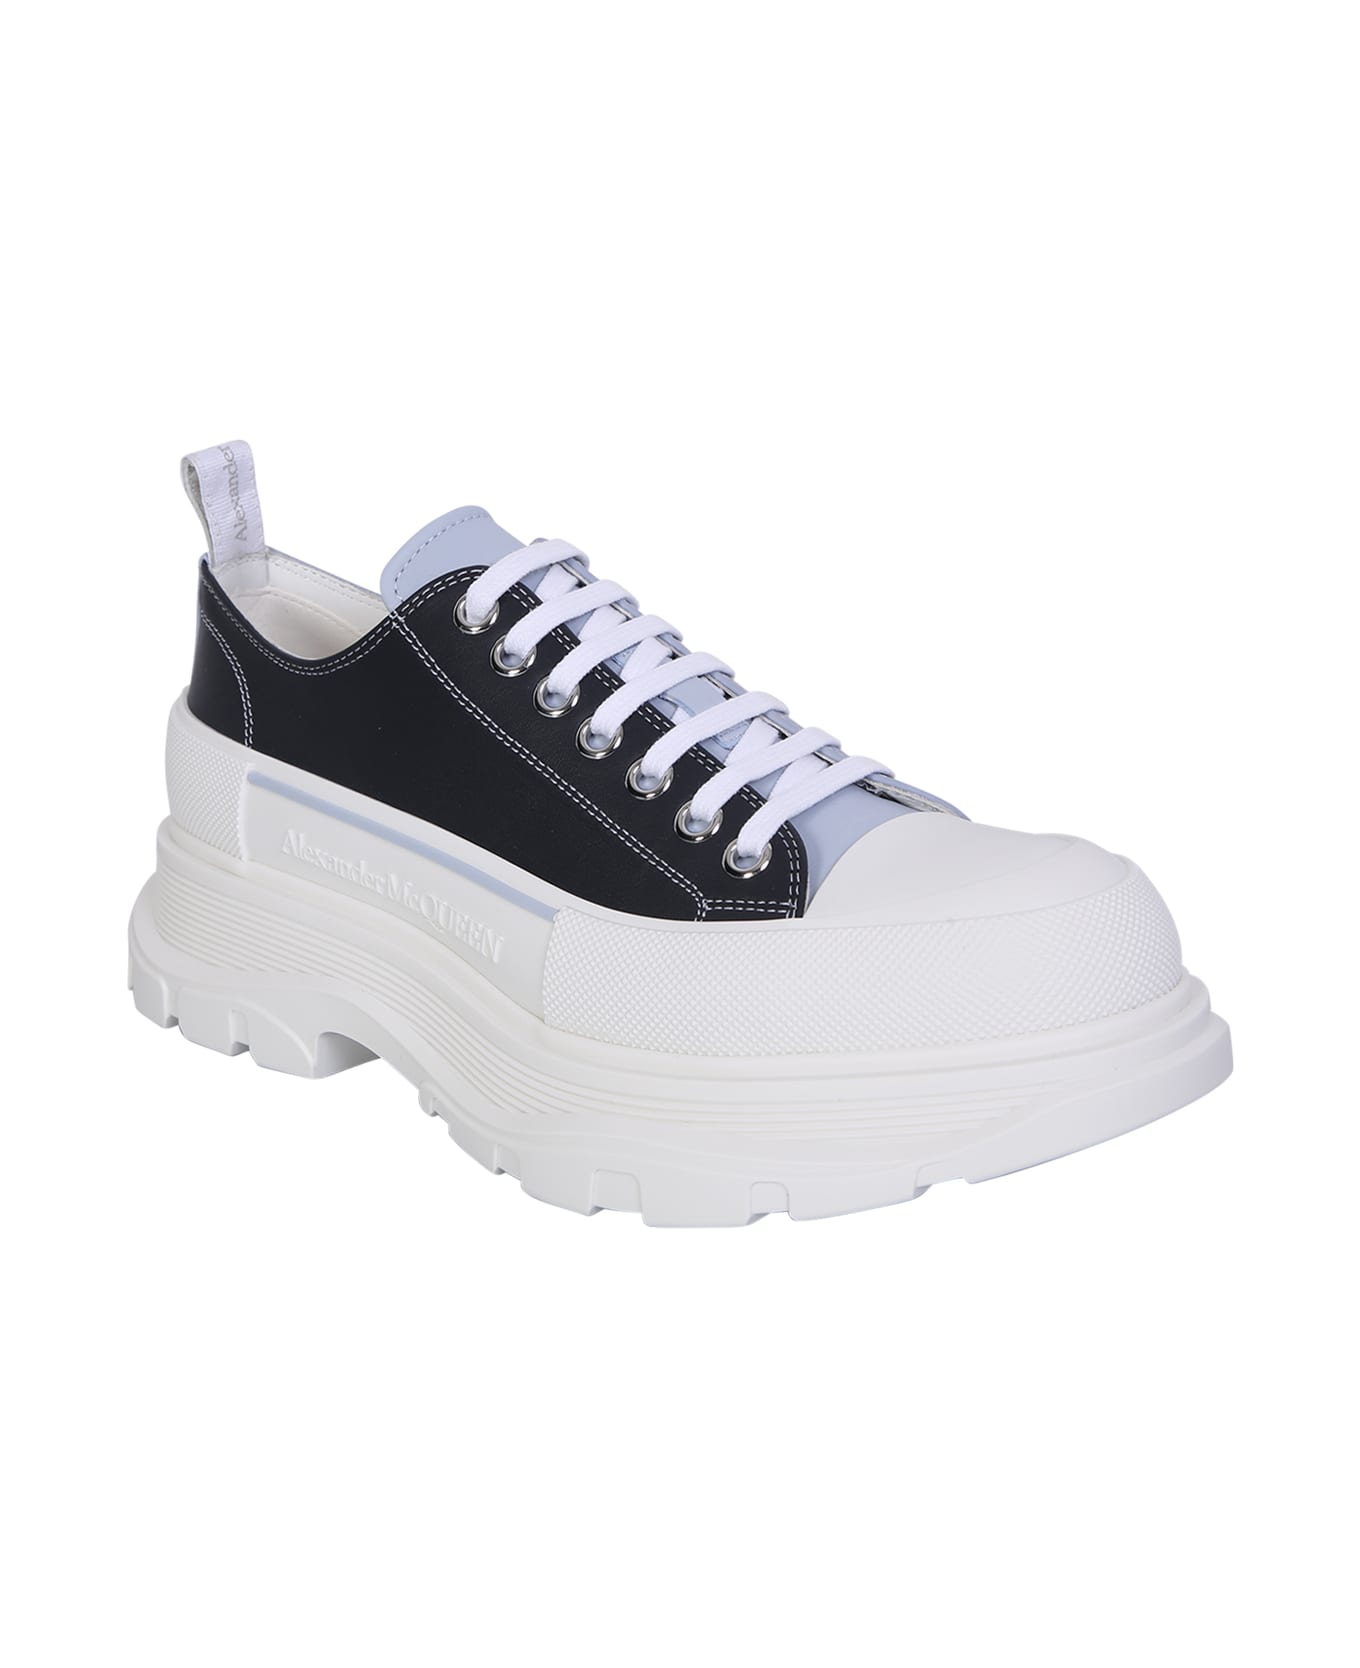 Alexander McQueen Tread Slick Round-toe Lace-up Sneakers - Blue